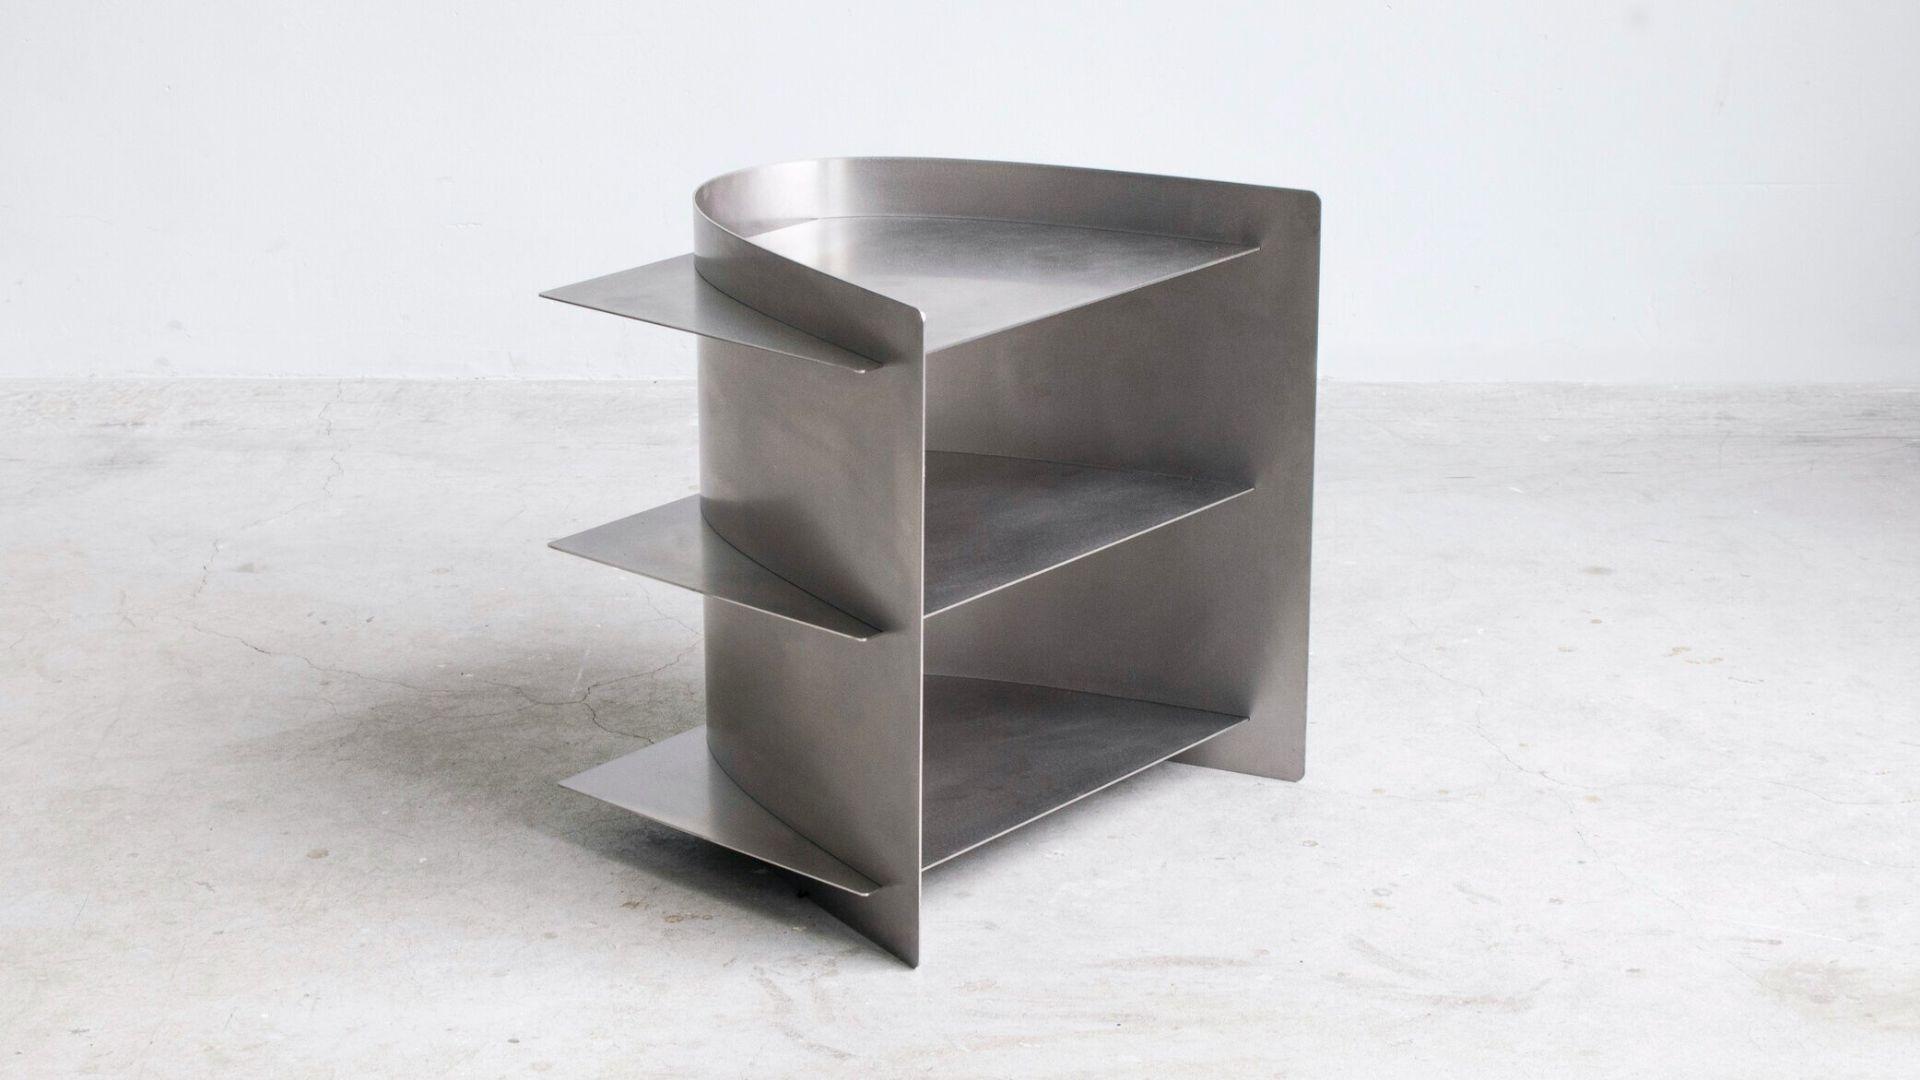 Tension furniture steel collection by Paul Coenen